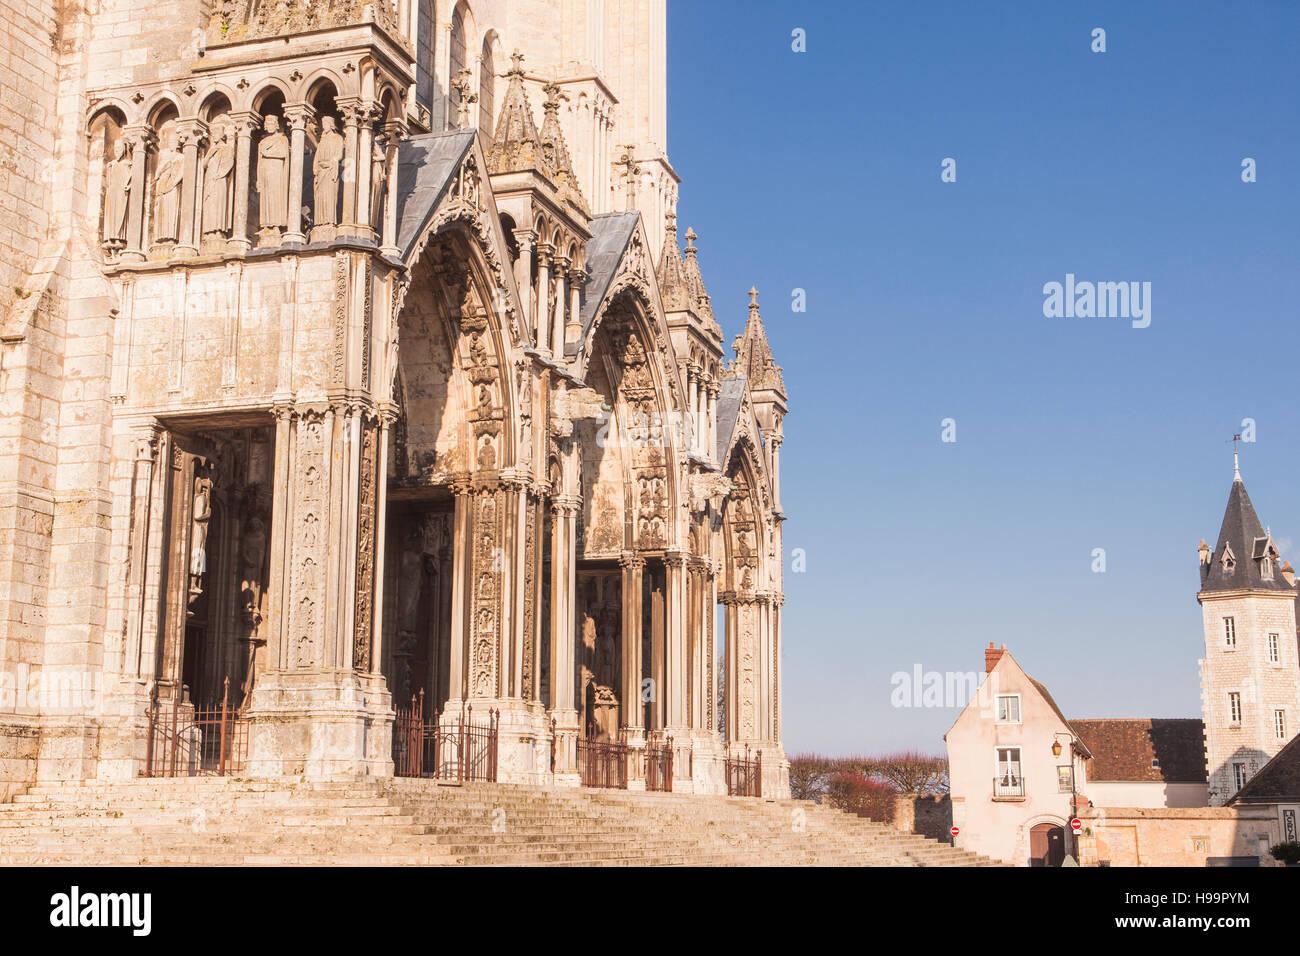 The south portal of Chartres cathedral. Stock Photo